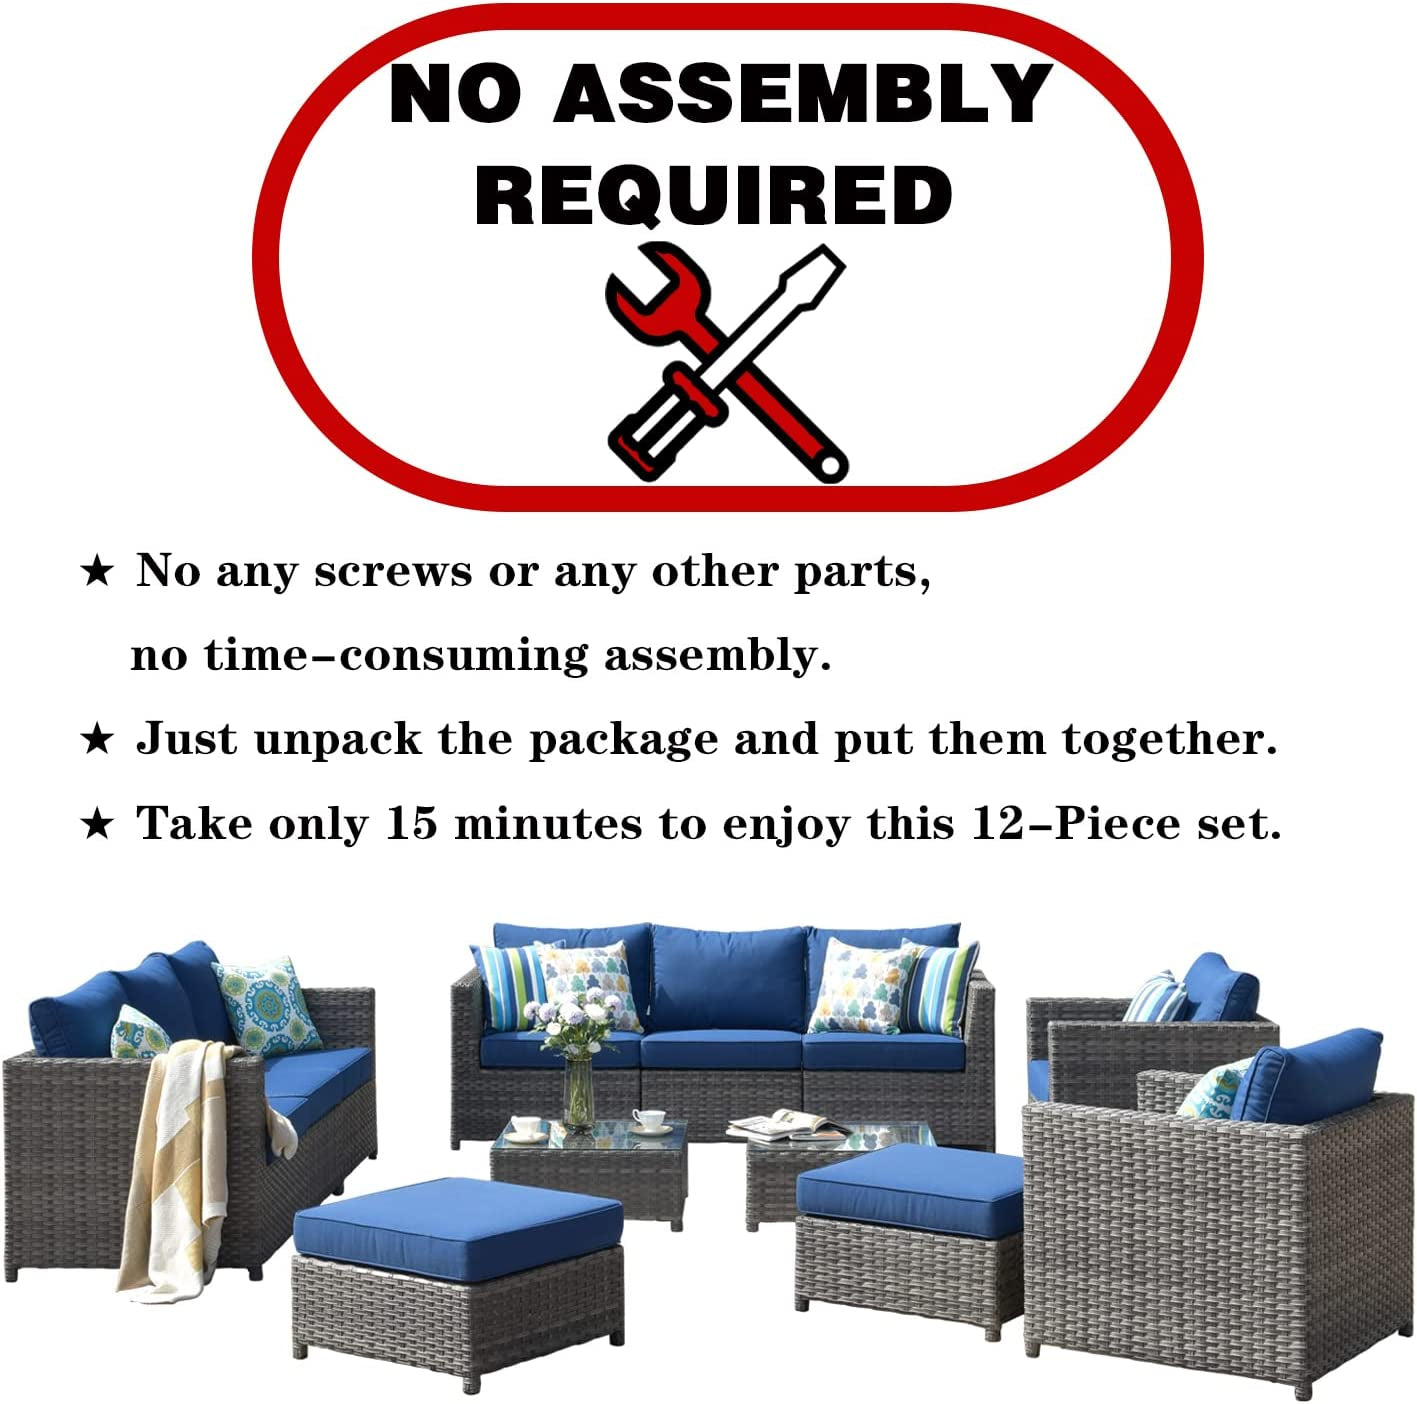 "Ultimate Outdoor Luxury: 12-Piece Patio Furniture Set with Stylish Design, No Assembly Needed, All-Weather Wicker, Aluminum Frame, Includes 4 Pillows and 2 Furniture Covers - Grey Wicker with Navy Blue Accents"